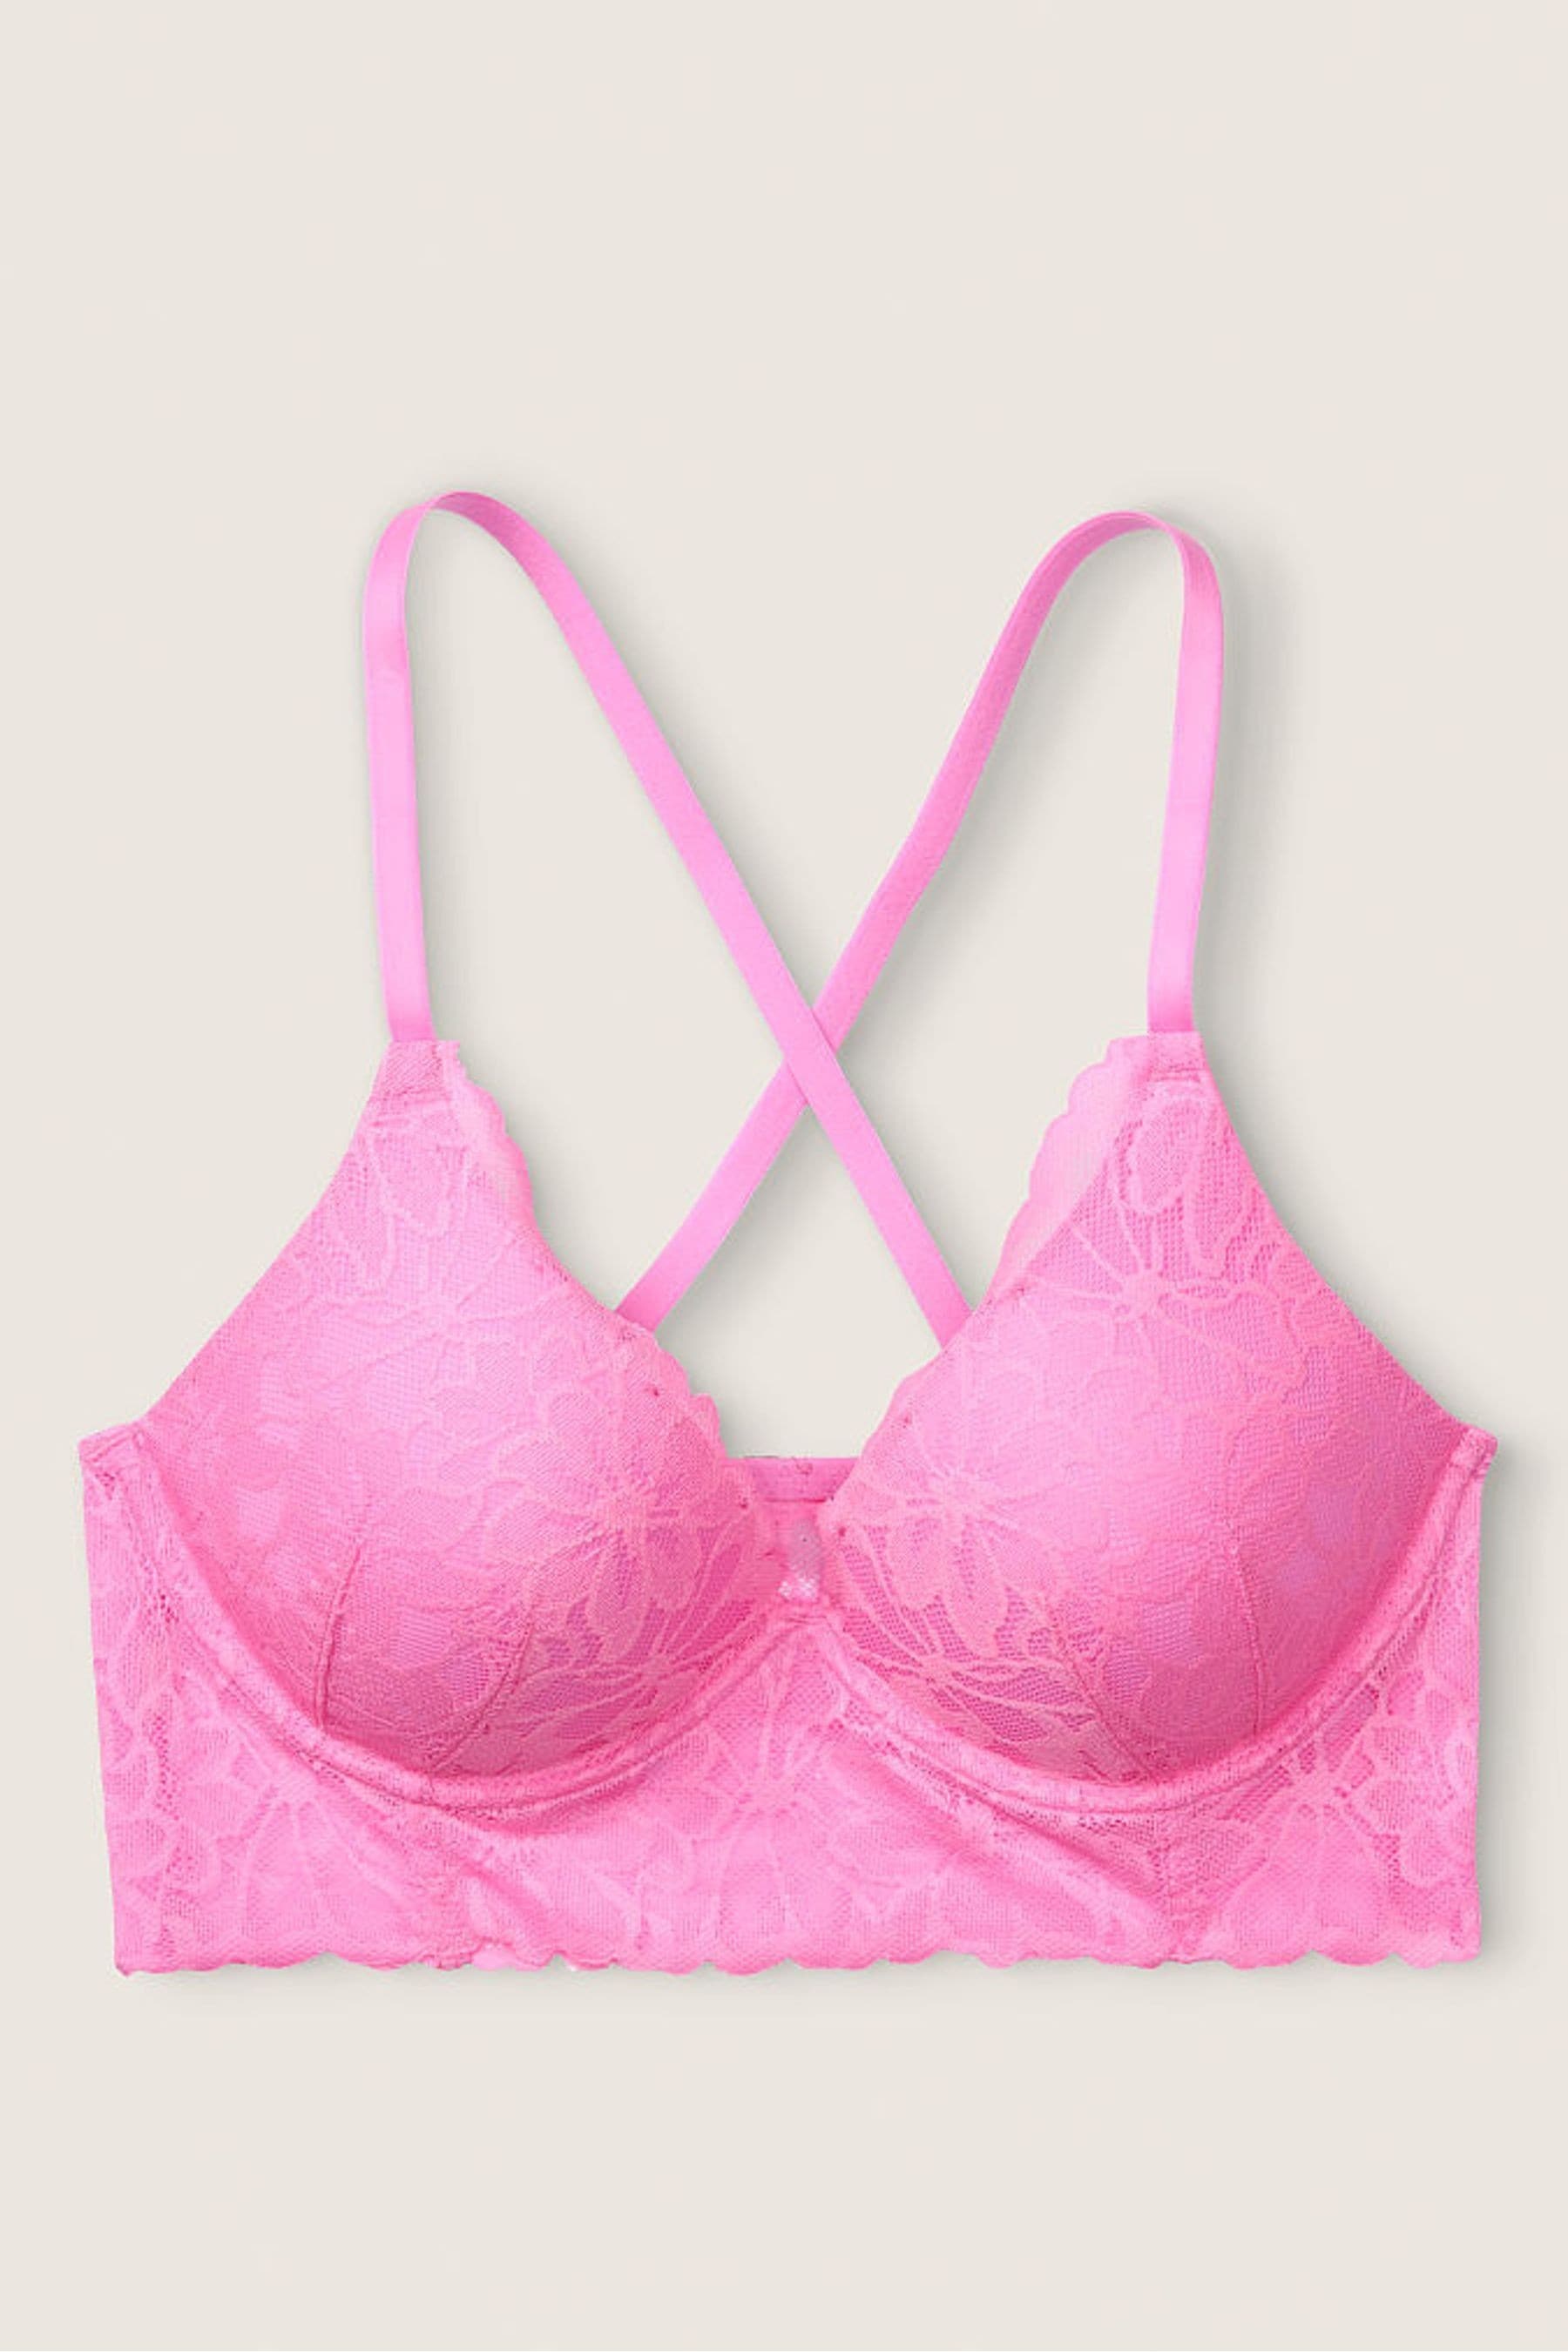 Buy Victoria's Secret PINK Lace Wireless Push-Up Bralette from the ...